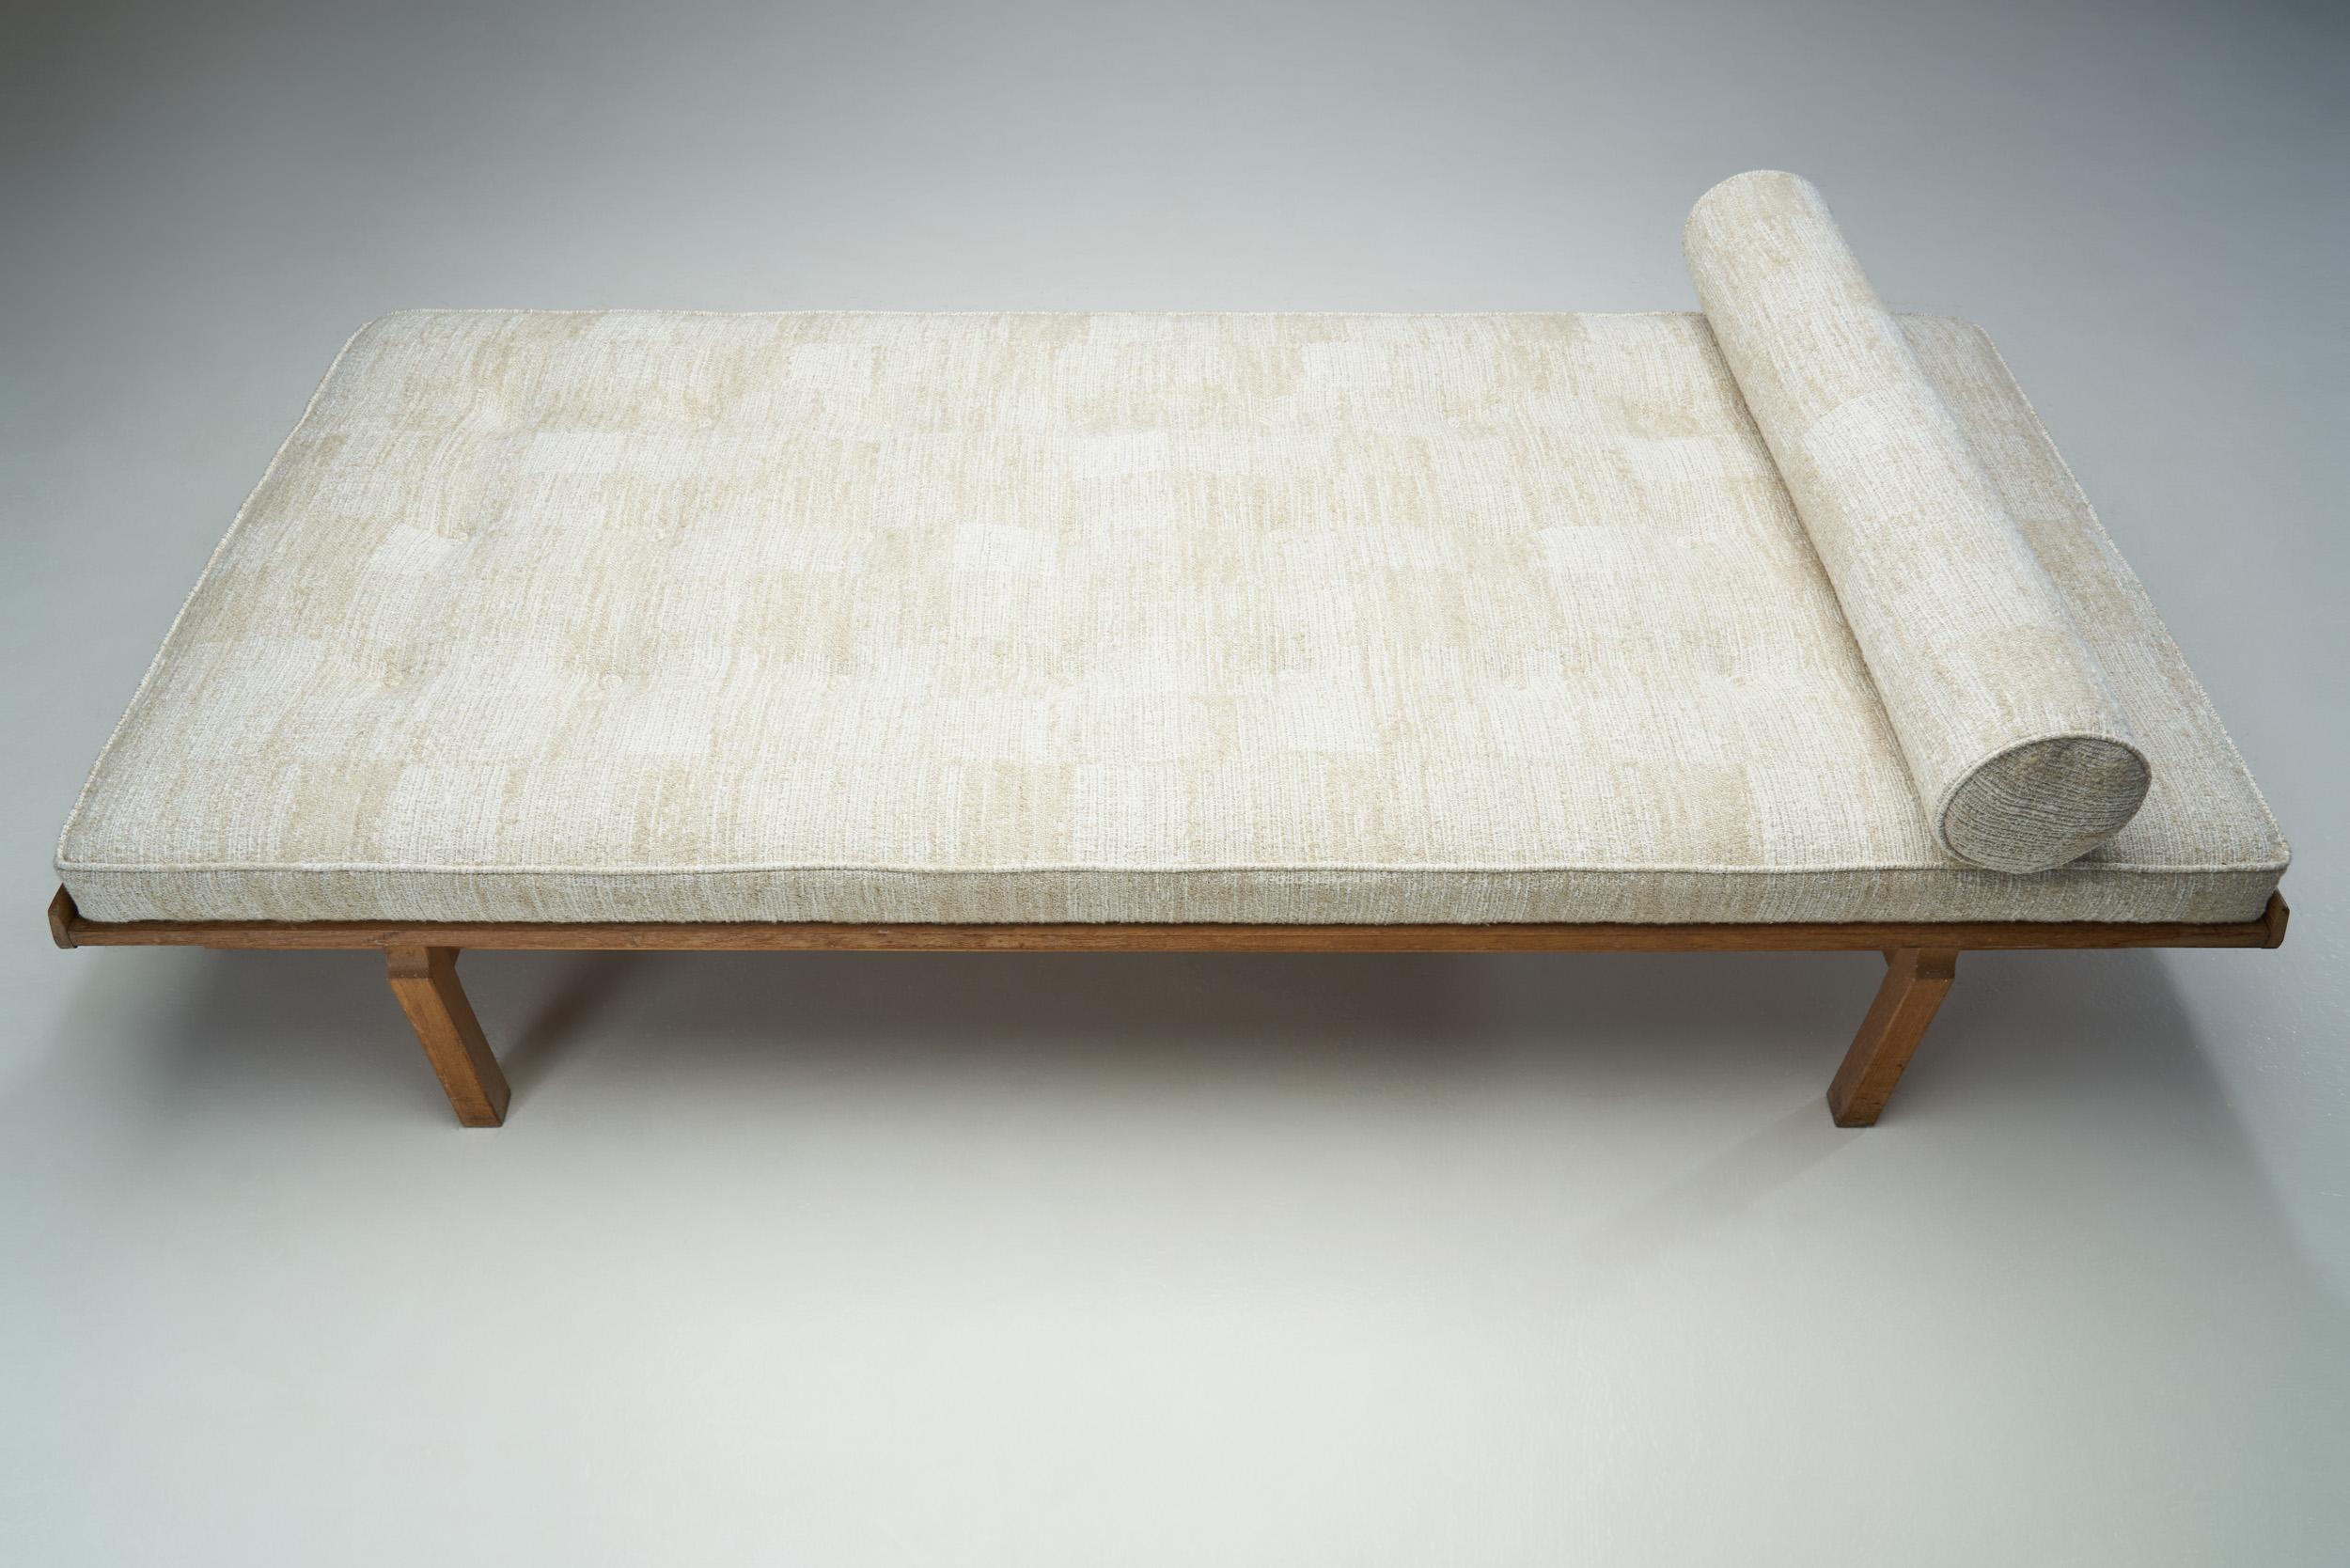 Fabric Danish Oak Daybed with Upholstered Mattress and Pillow, Denmark, ca 1950s For Sale